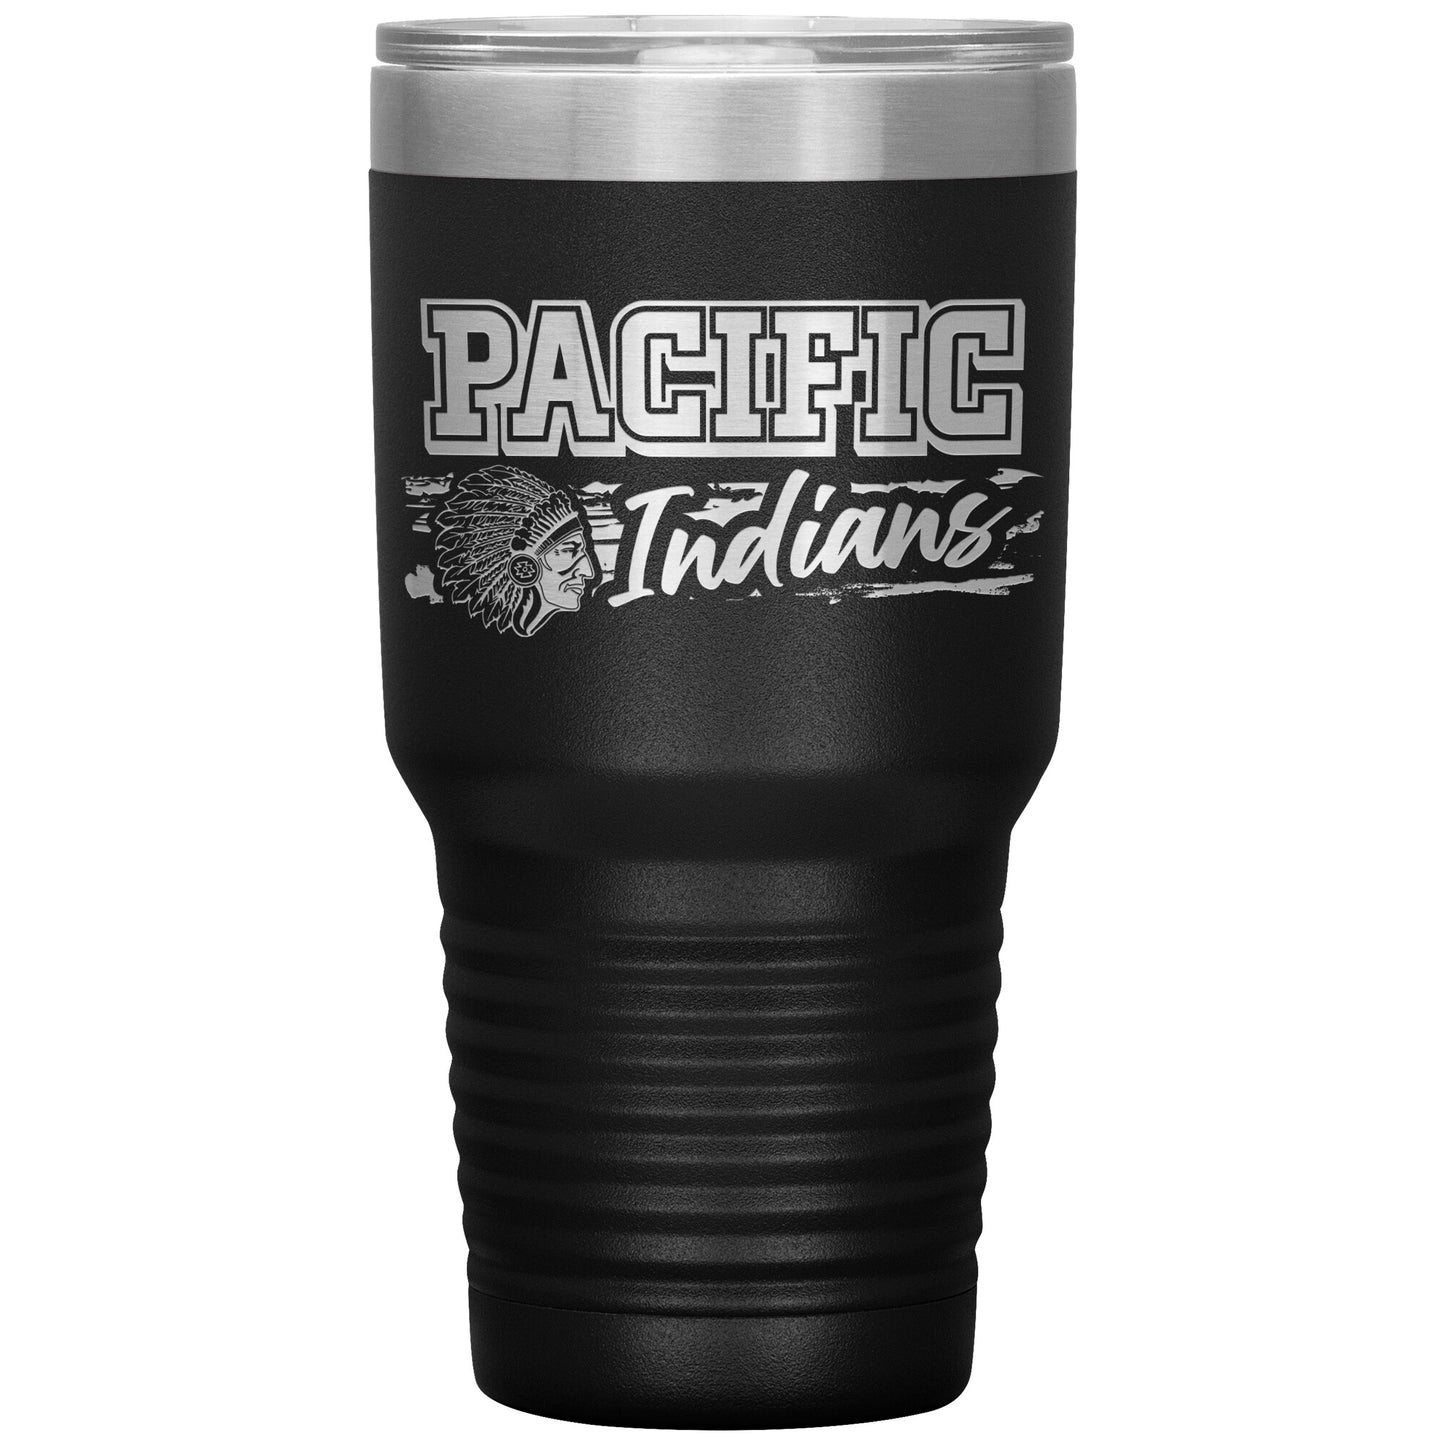 Pacific Indians Design 2 - Insulated Tumblers